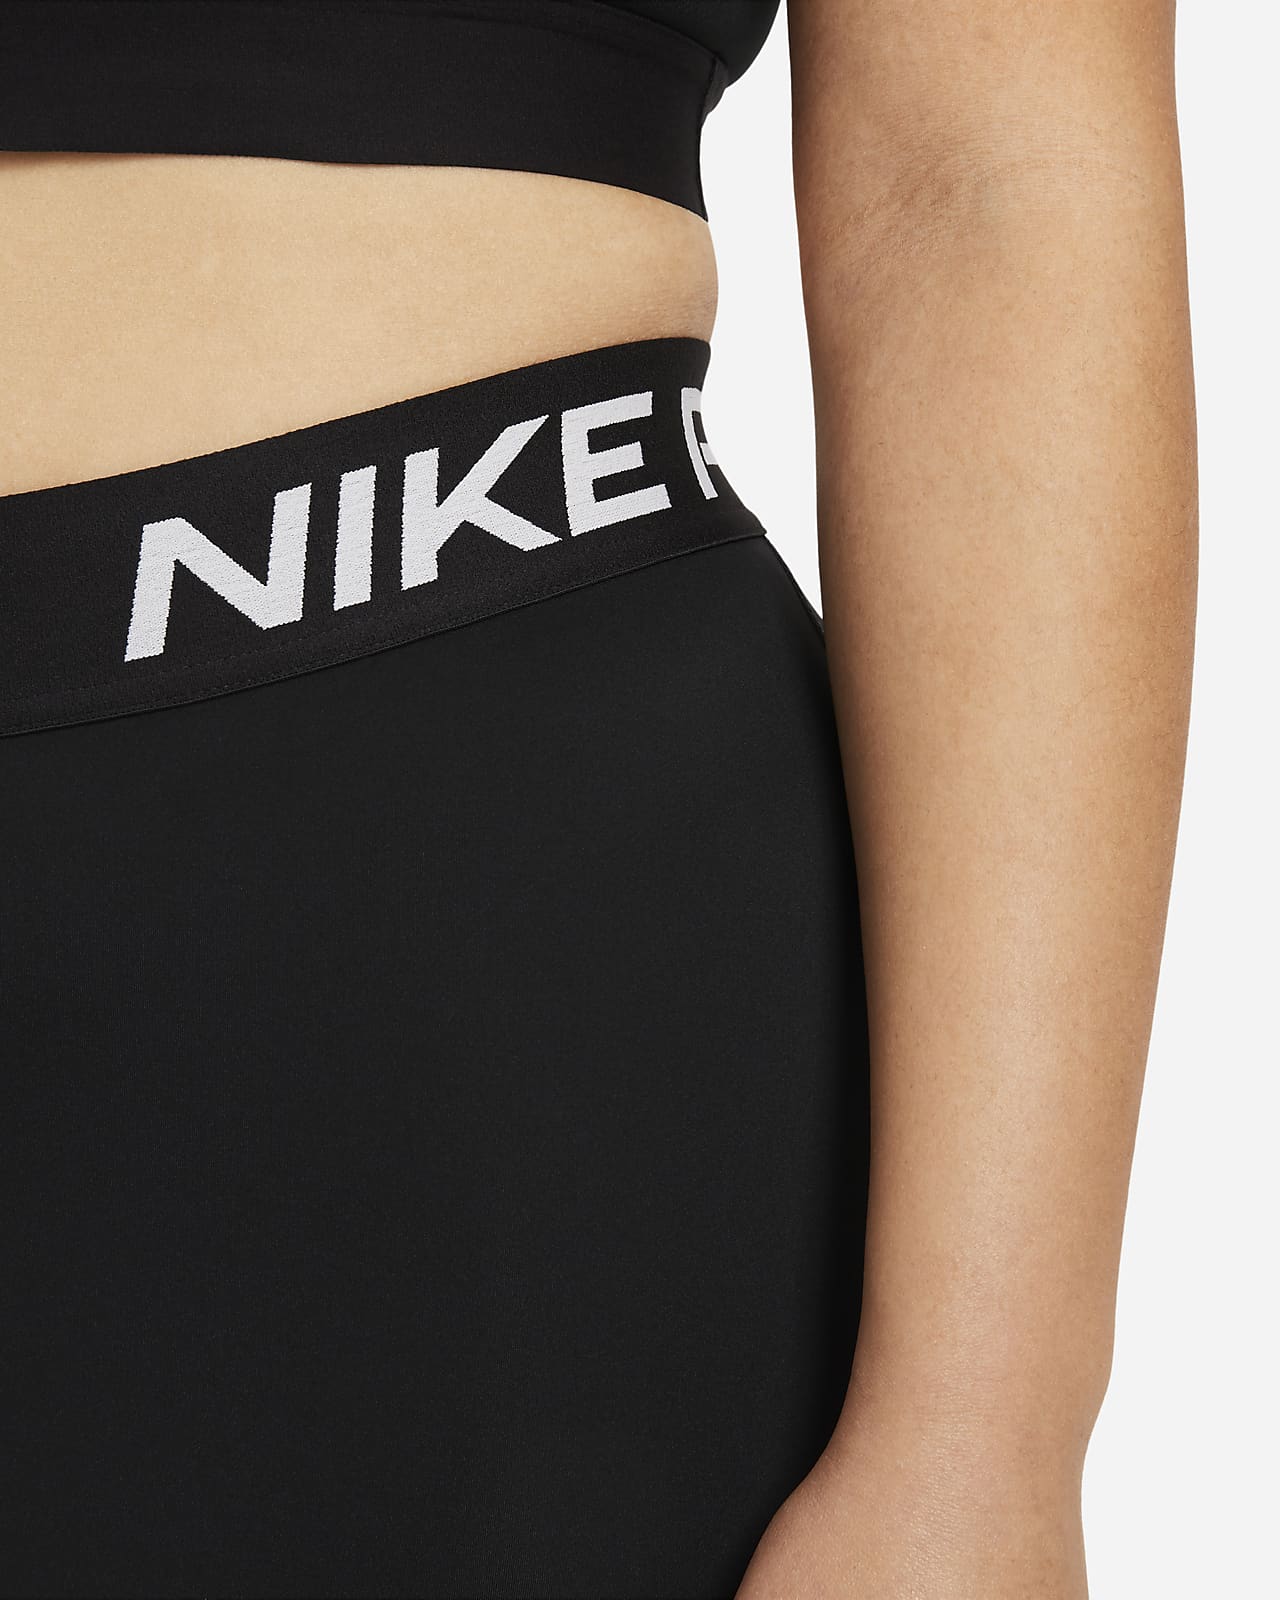 Buy Nike Pro 365 Training Tights Women from £22.95 (Today) – Best Deals on